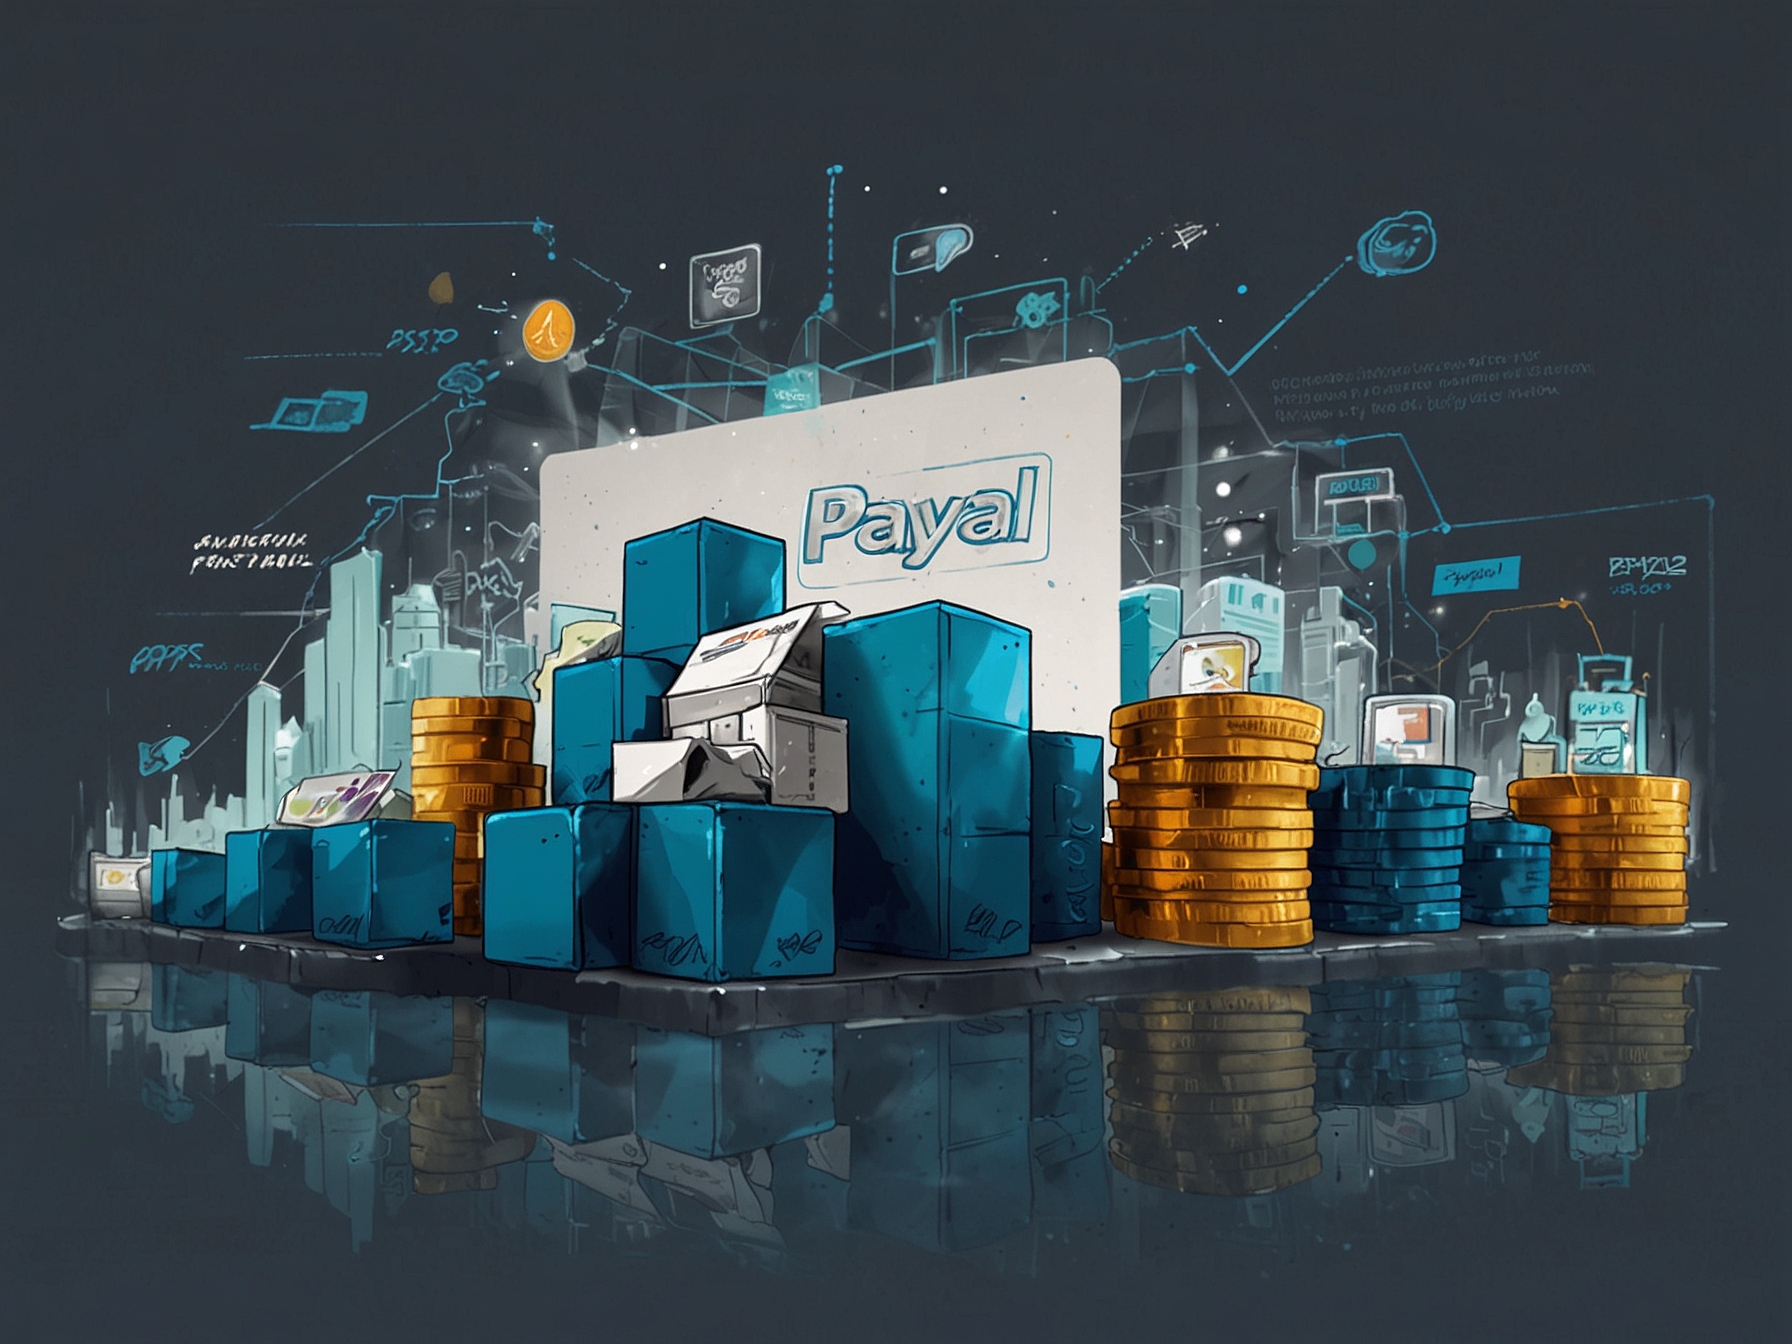 An illustration showing the growth of PayPal's user base and services, highlighting its position as a leader in the digital payments industry with 426 million active accounts.